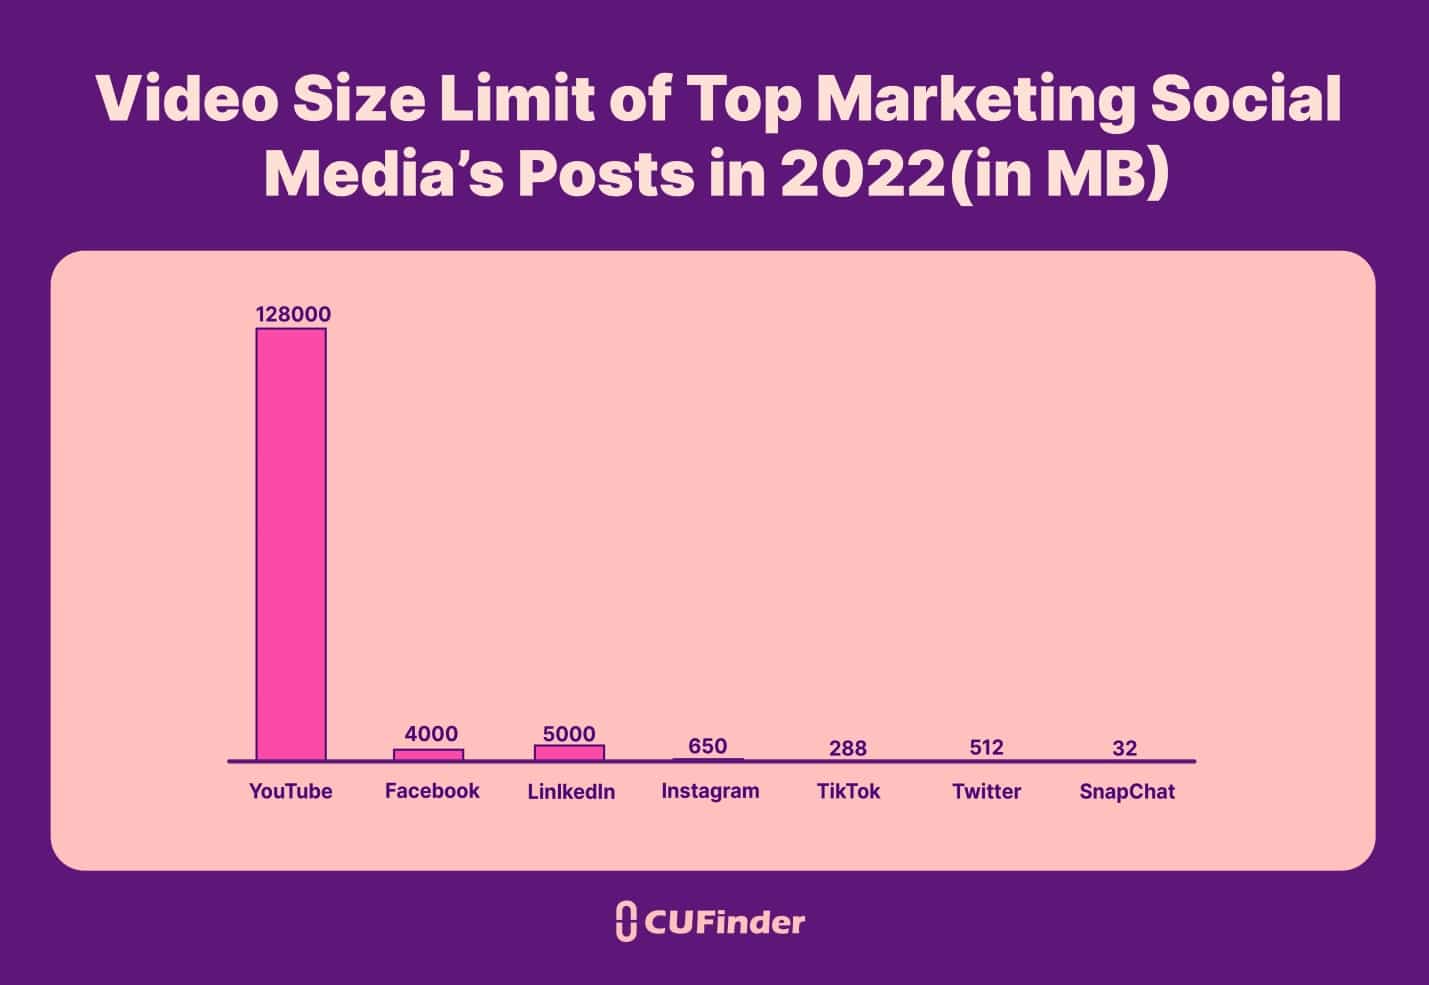 What are the video size limit of various top Social Channels in 2022?
